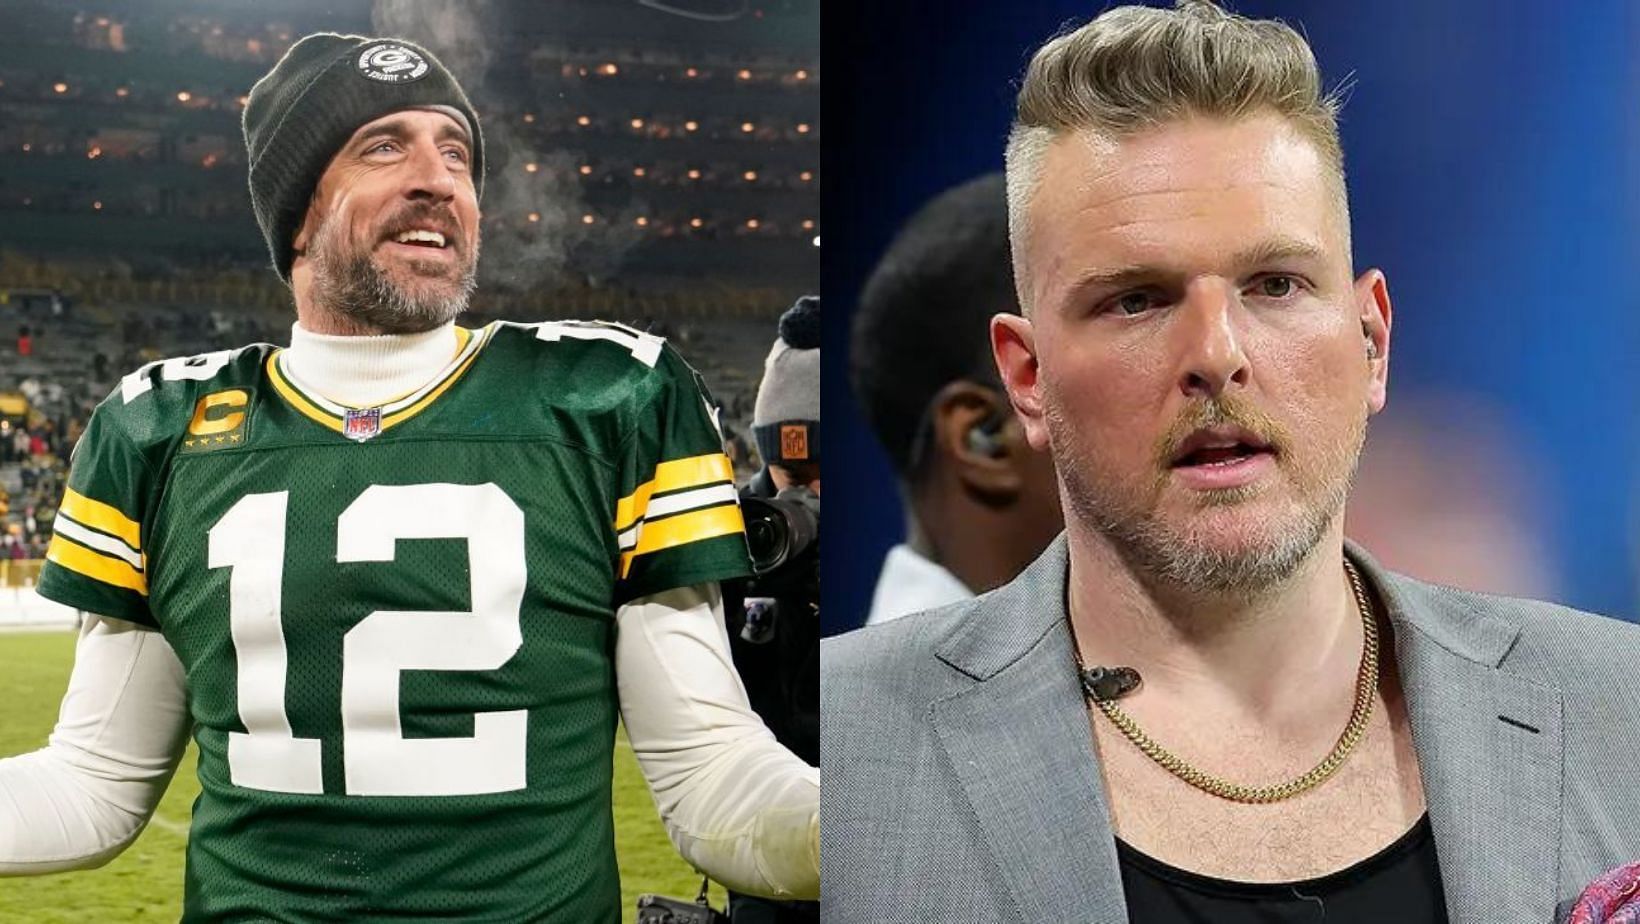 Pat McAfee applauded Rodgers for participating in a psychedelics conference 